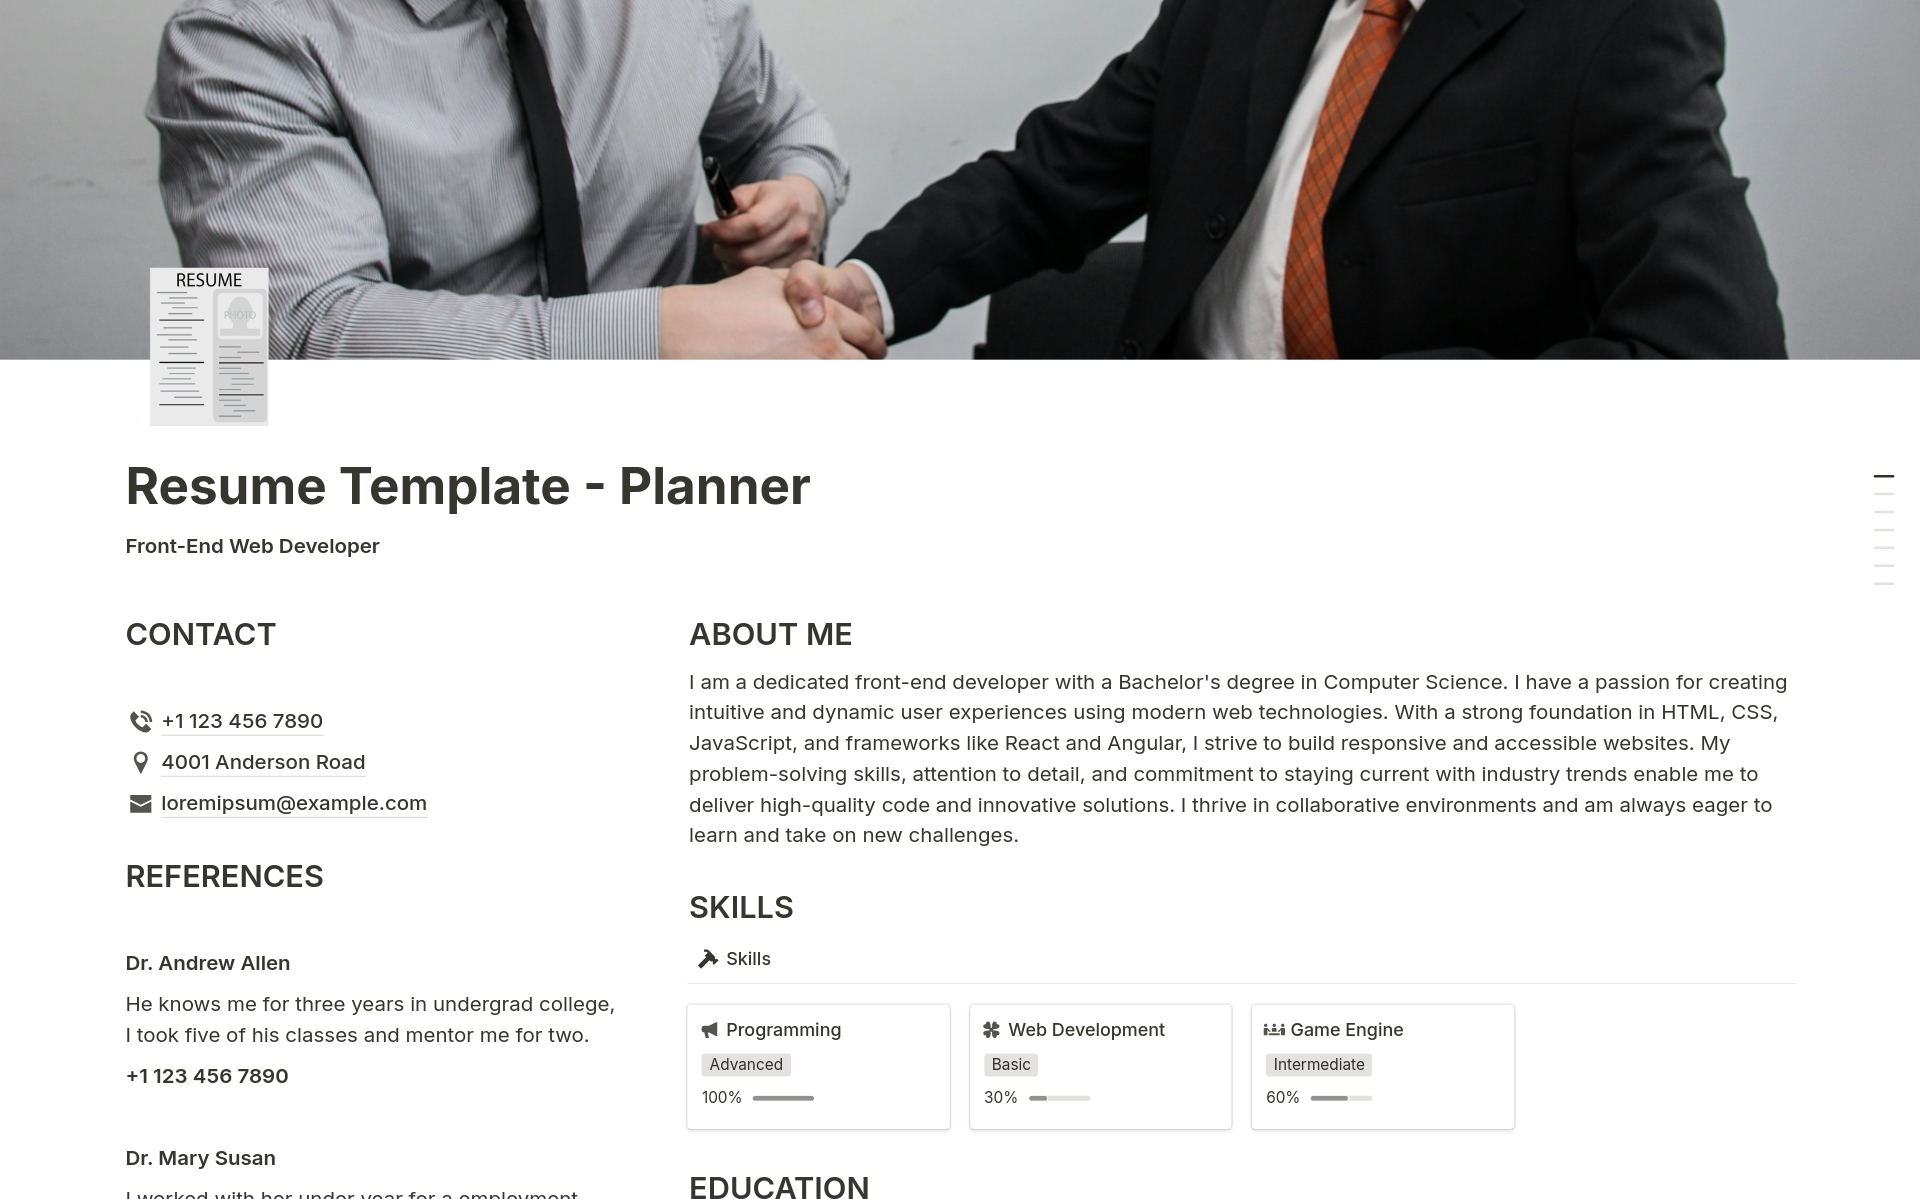 A template preview for Resume - Planner